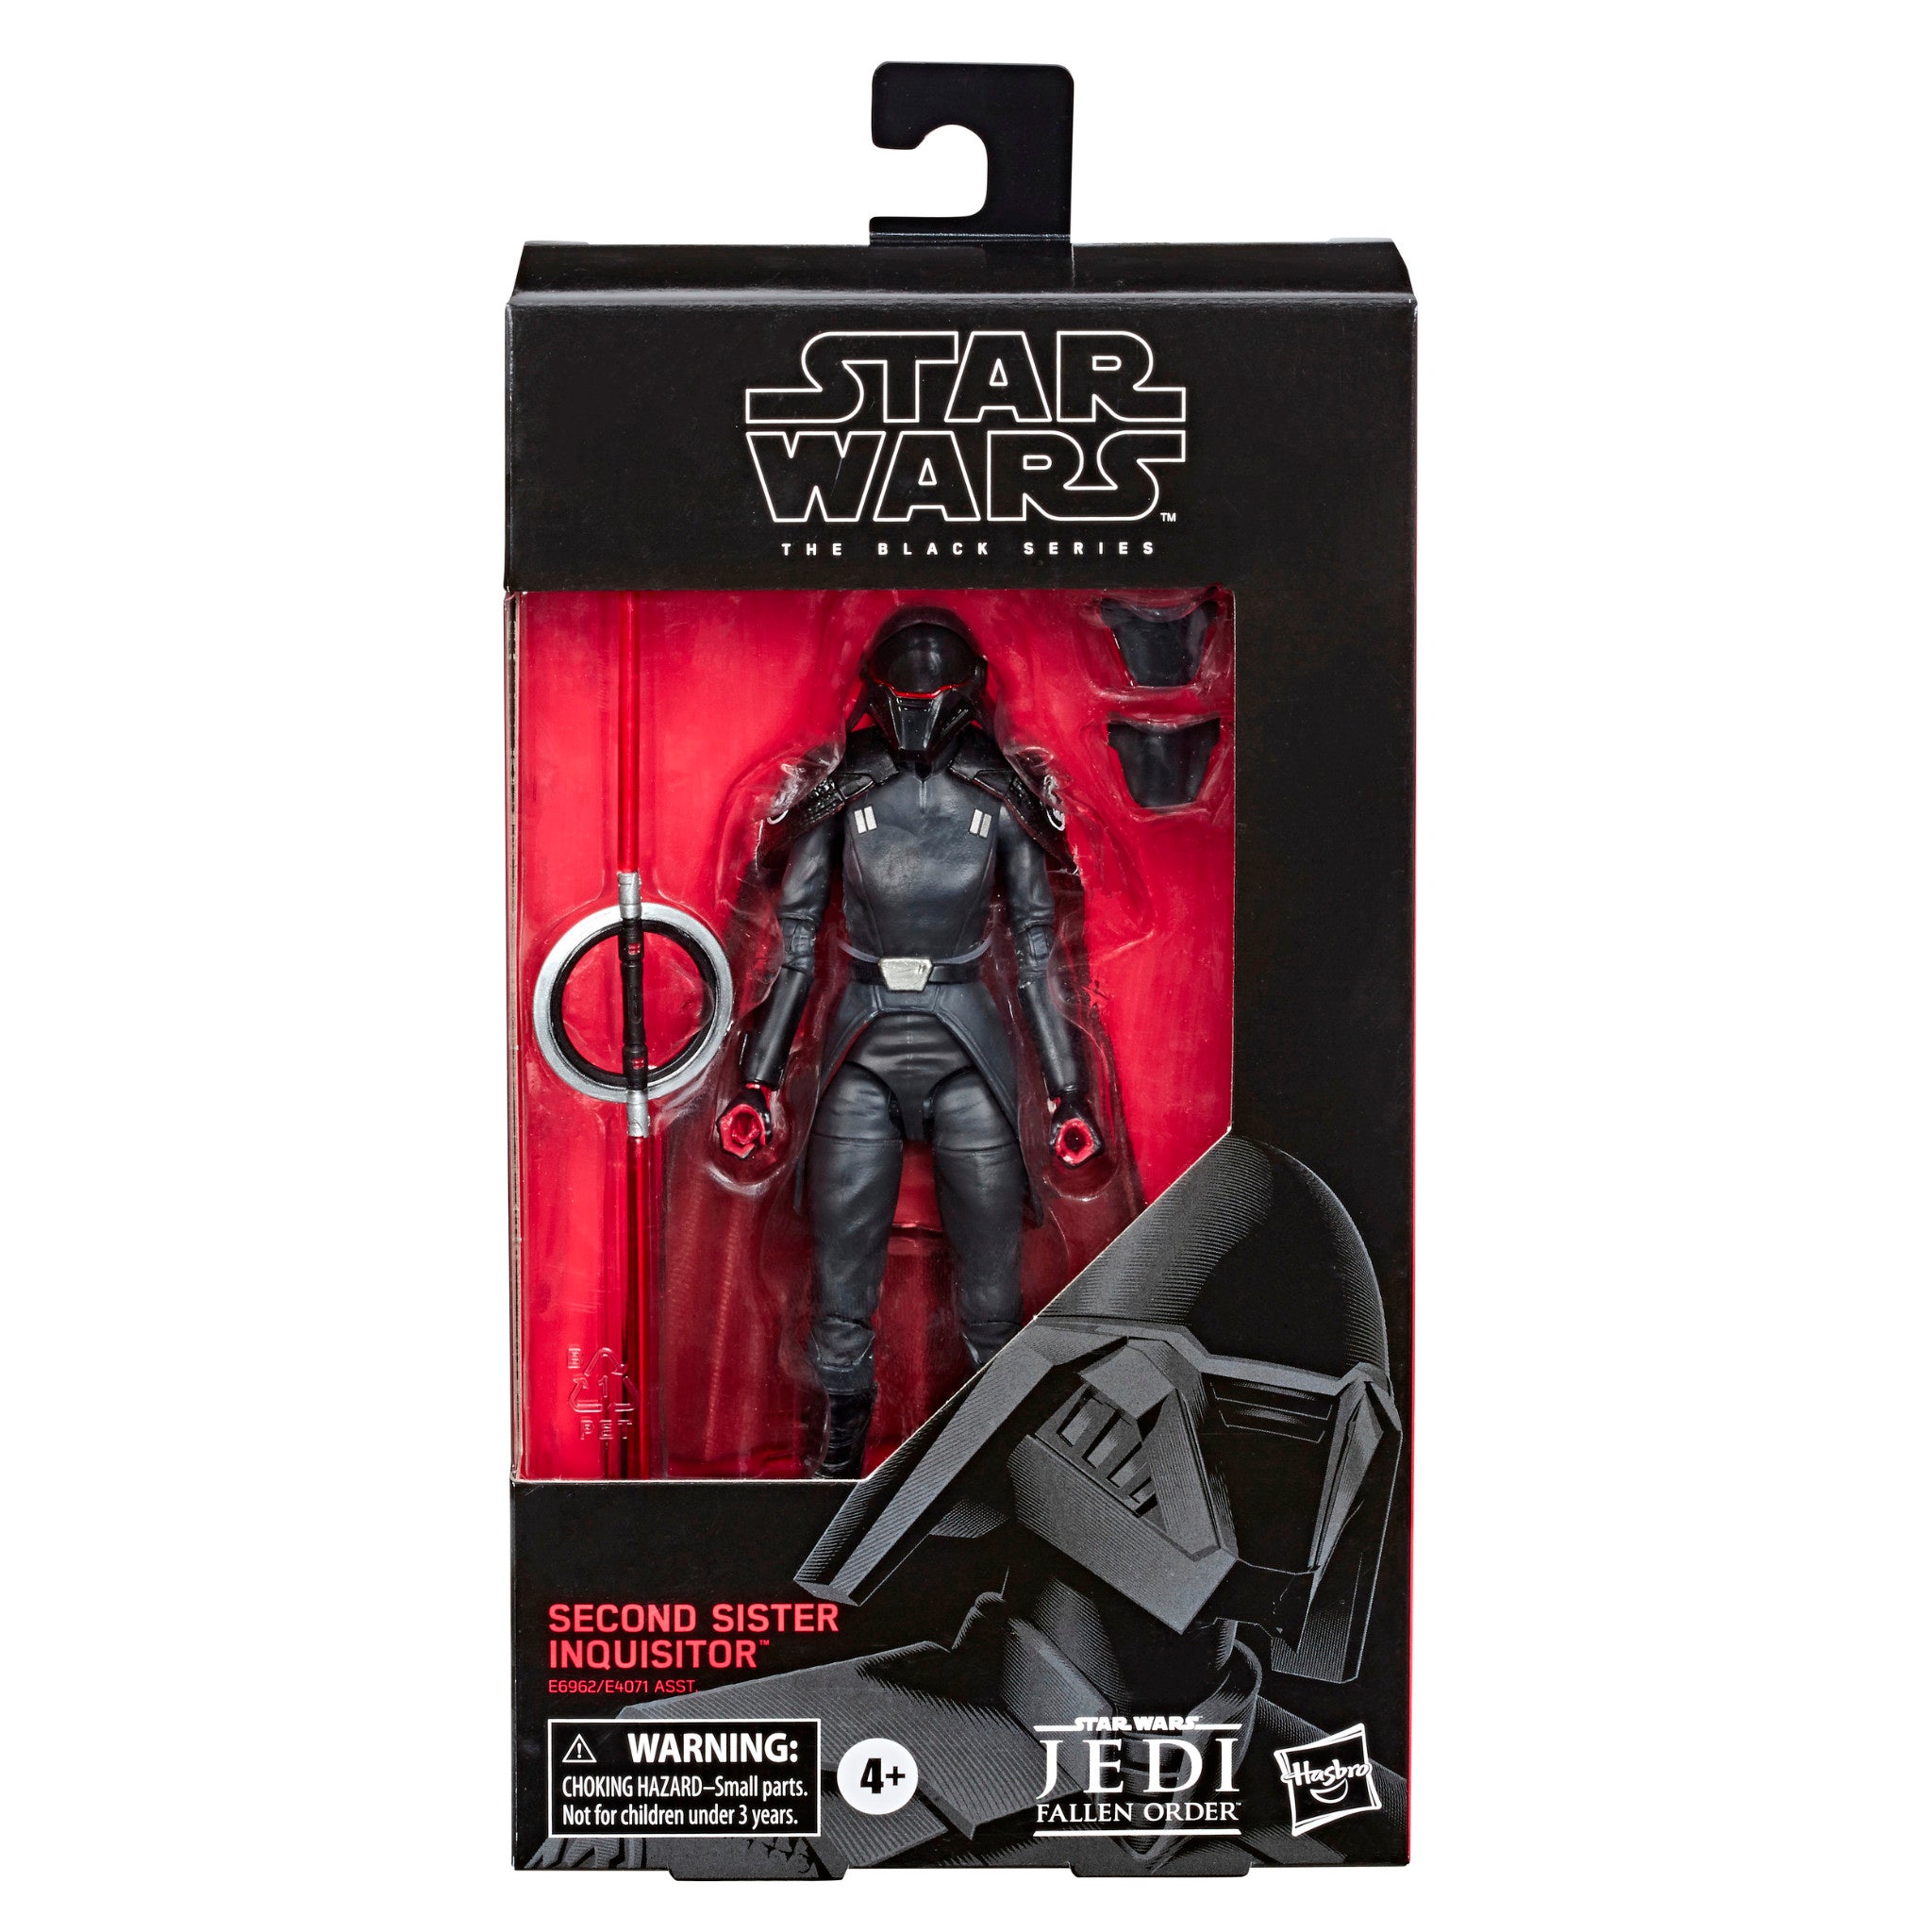 Star Wars Black Series 6" #95 Second Sister Inquisitor